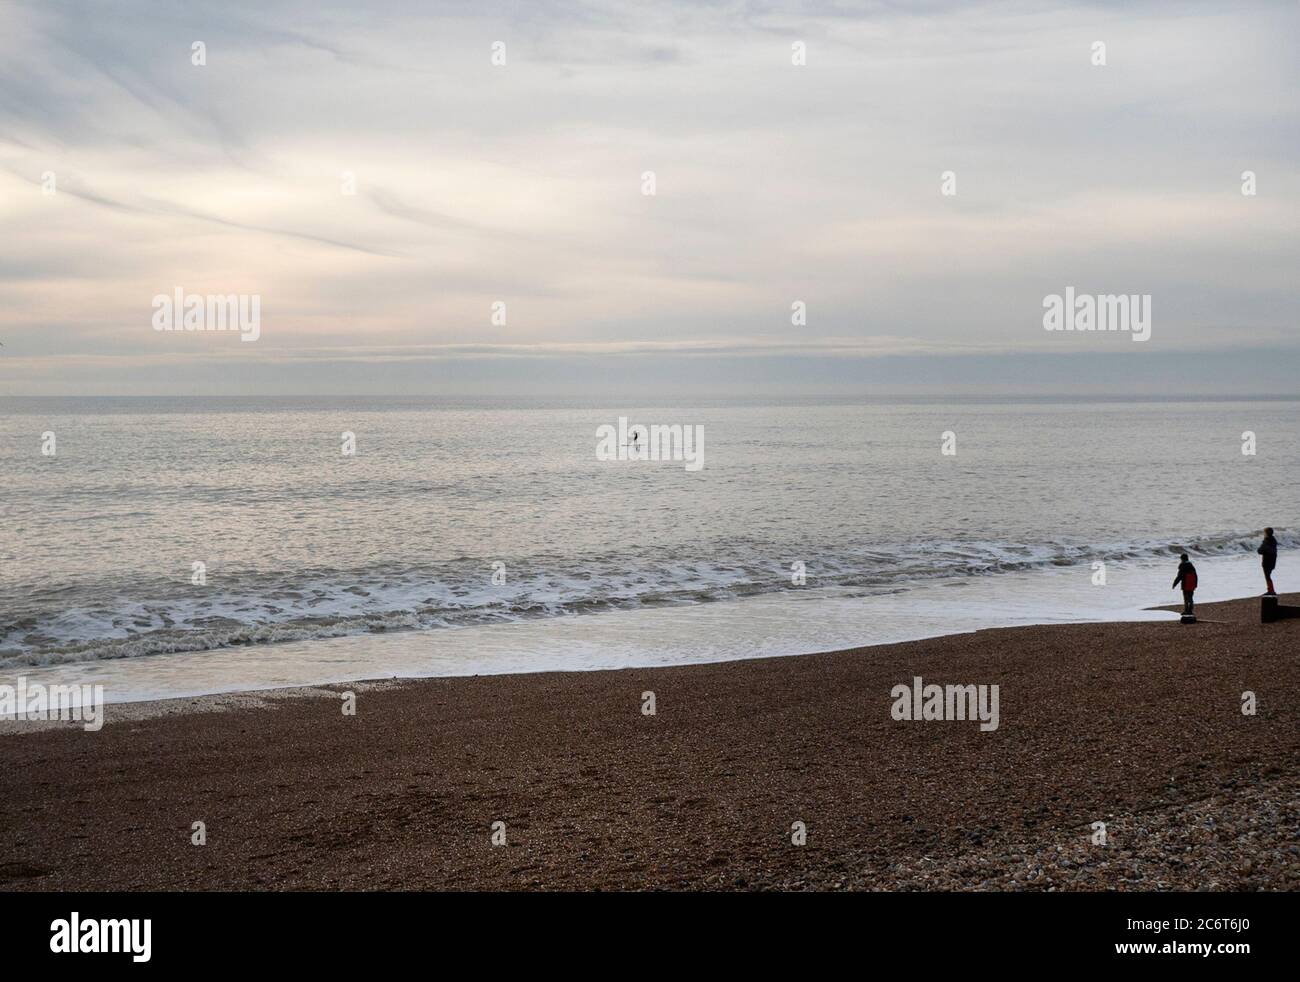 Two People Watching A Paddleboarder In The Early Evening Light Off The Coast At Brighton, East Sussex, UK Stock Photo